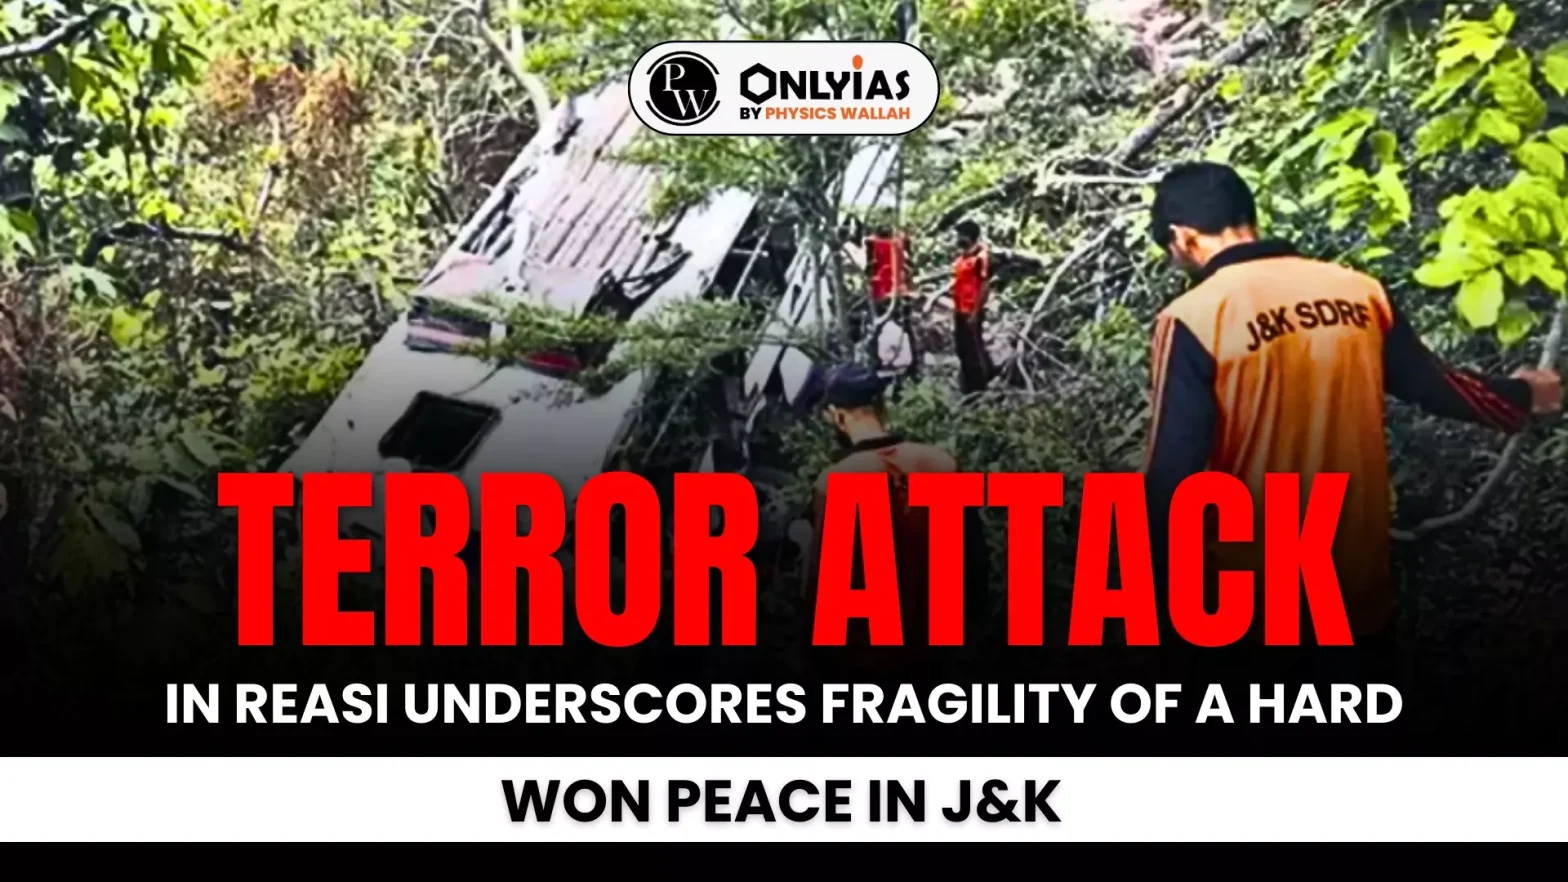 Terror Attack In Reasi Underscores Fragility Of A Hard-Won Peace In J&K